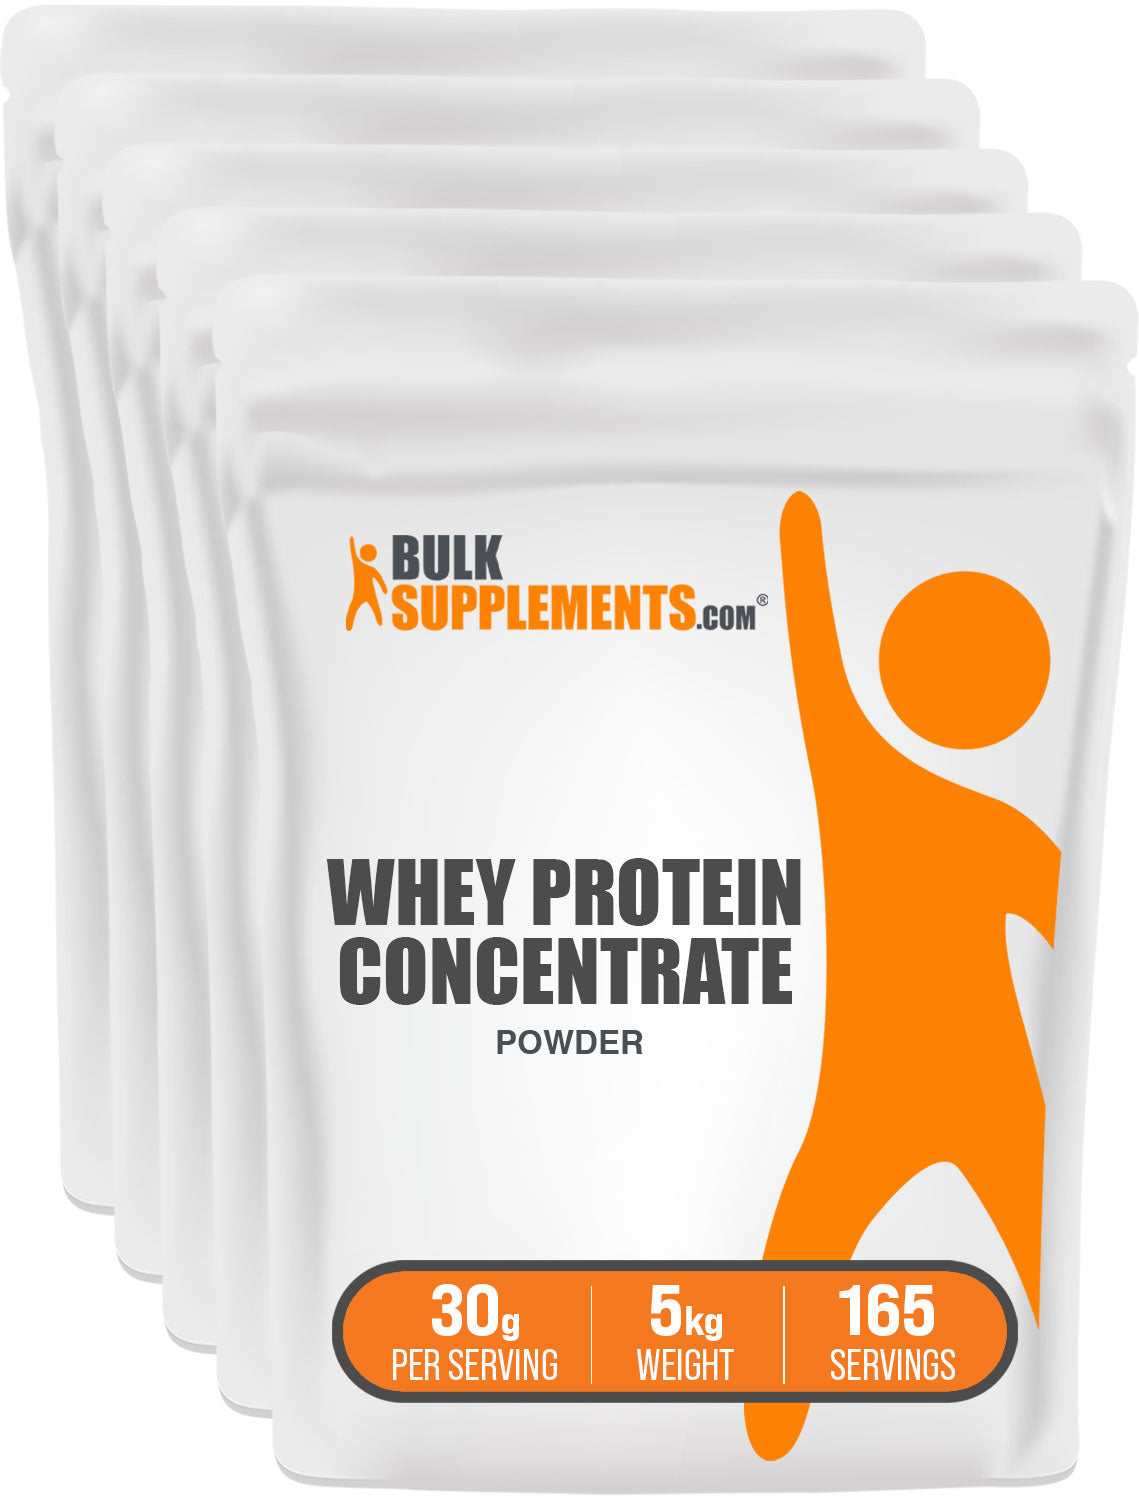 BulkSupplements Whey Protein Concentrate 80% Powder 5kg bag